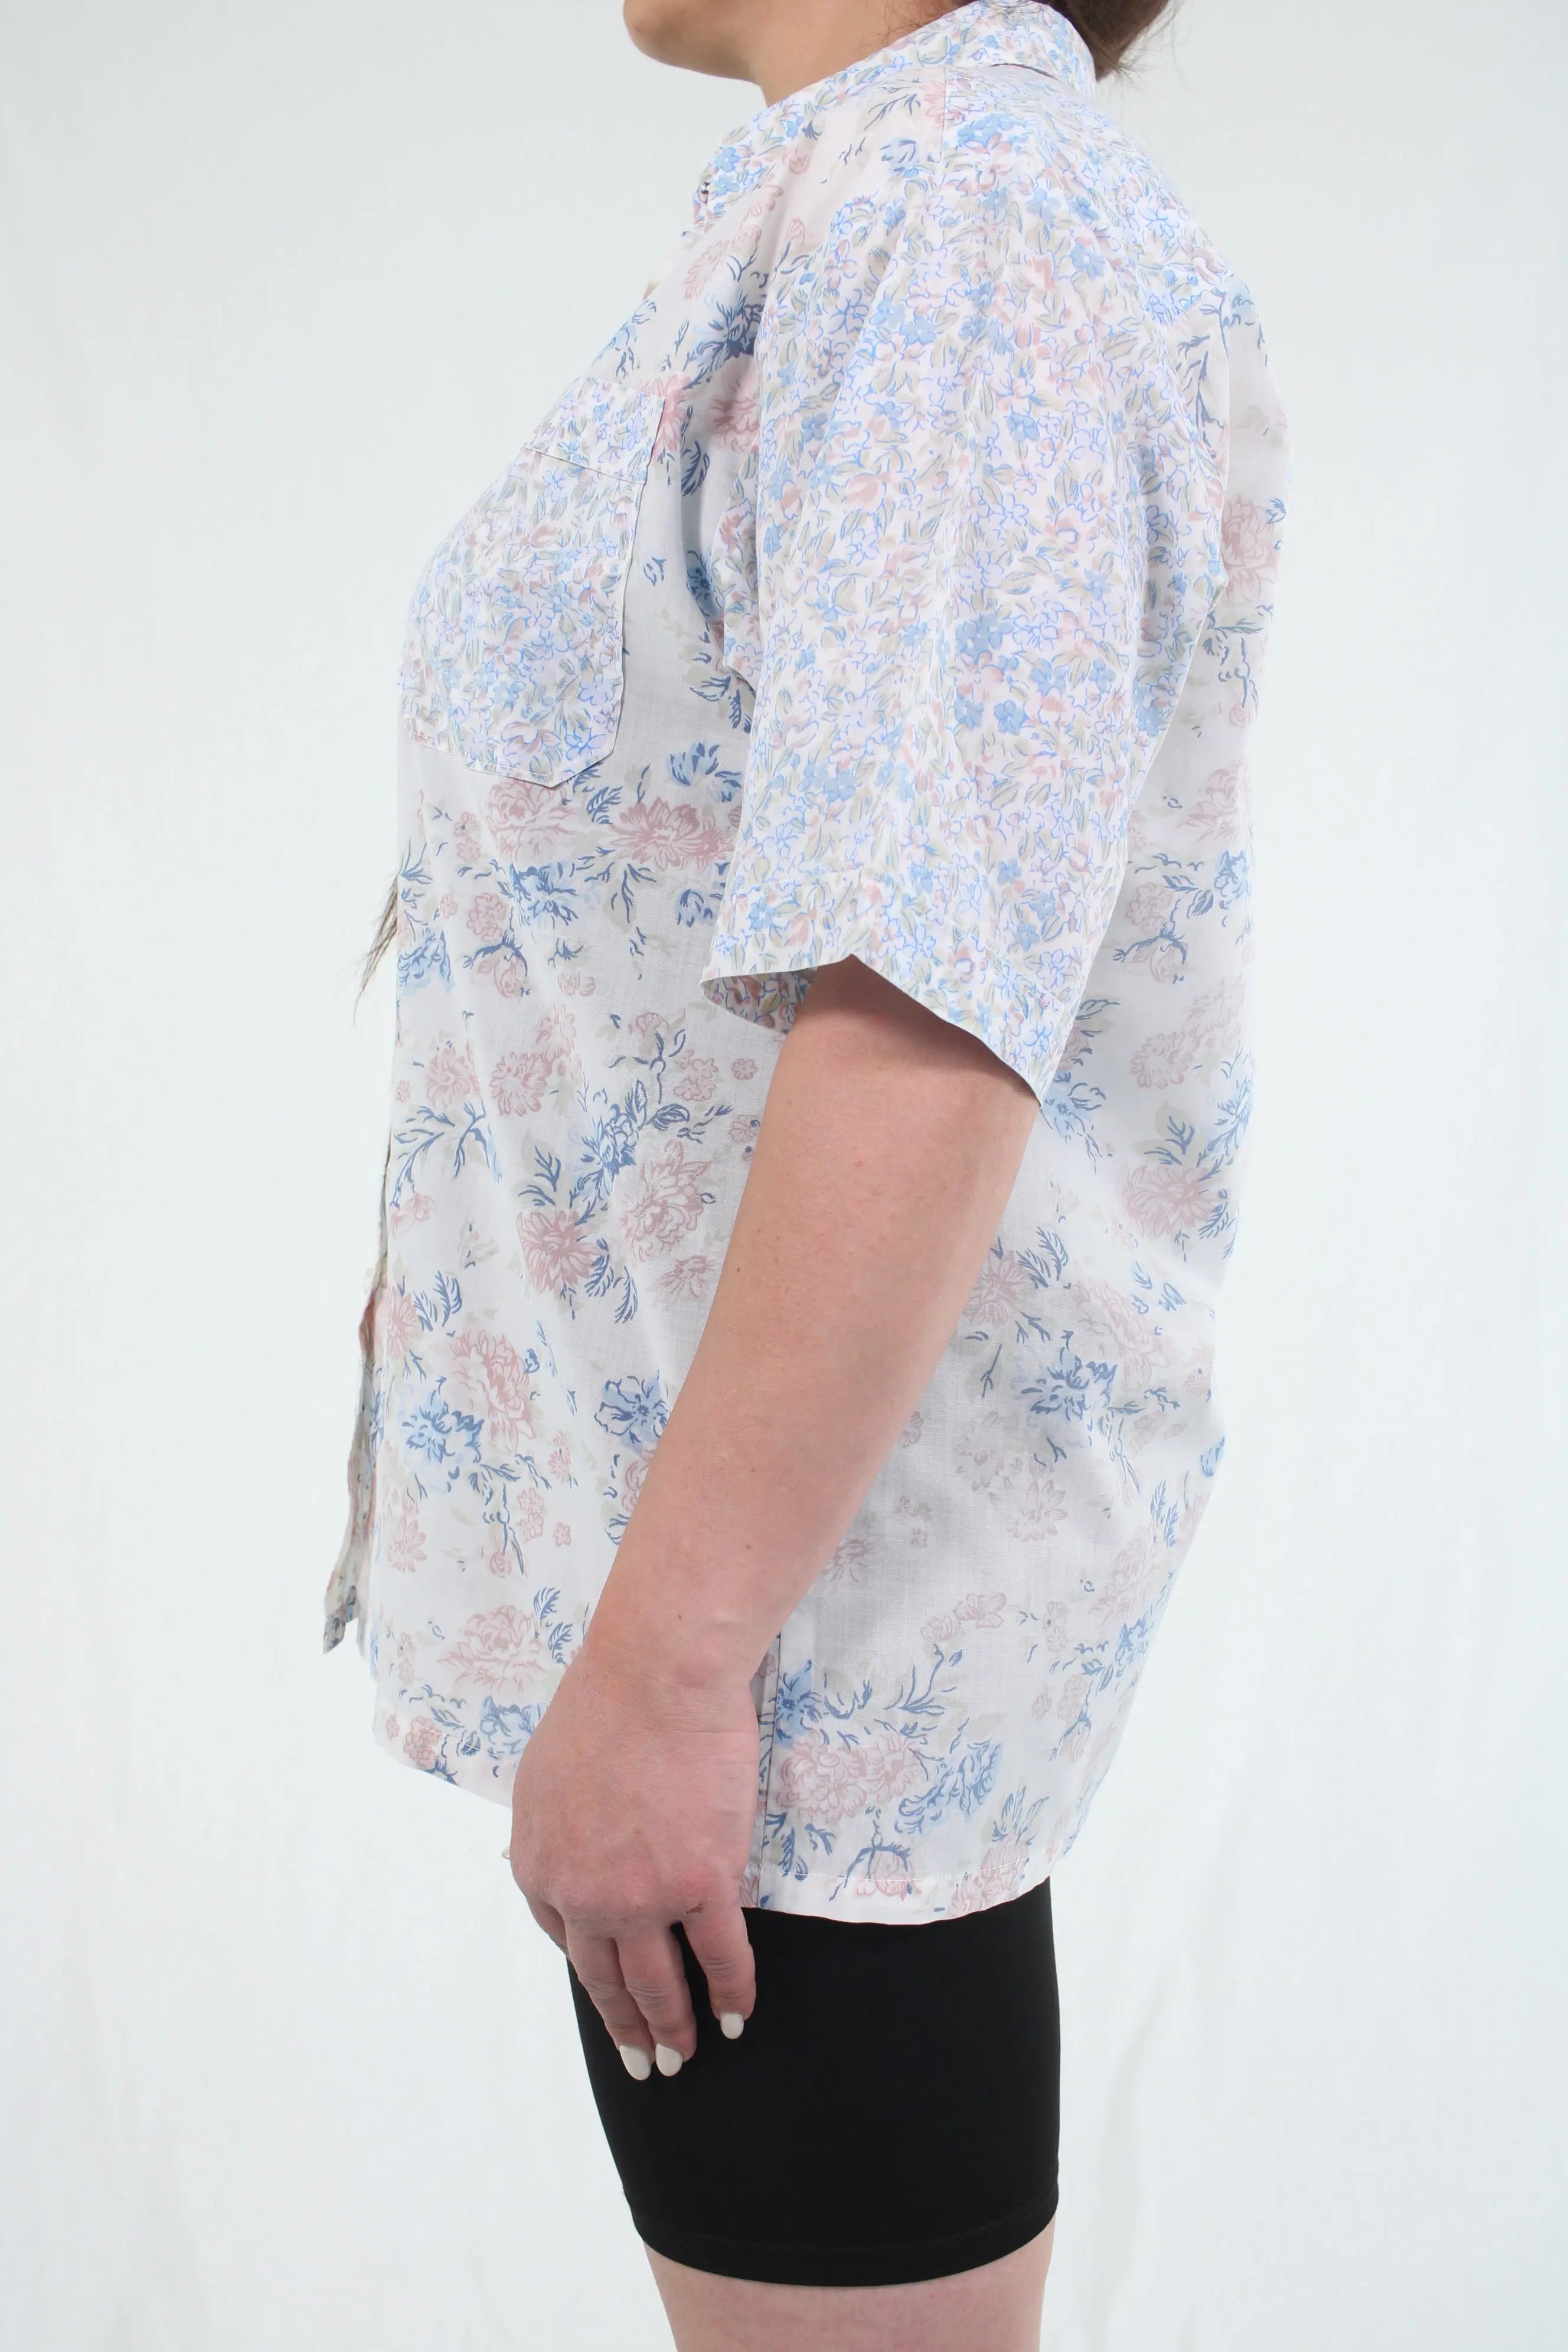 Ronate Bargini - 80s Floral Short Sleeve Blouse- ThriftTale.com - Vintage and second handclothing